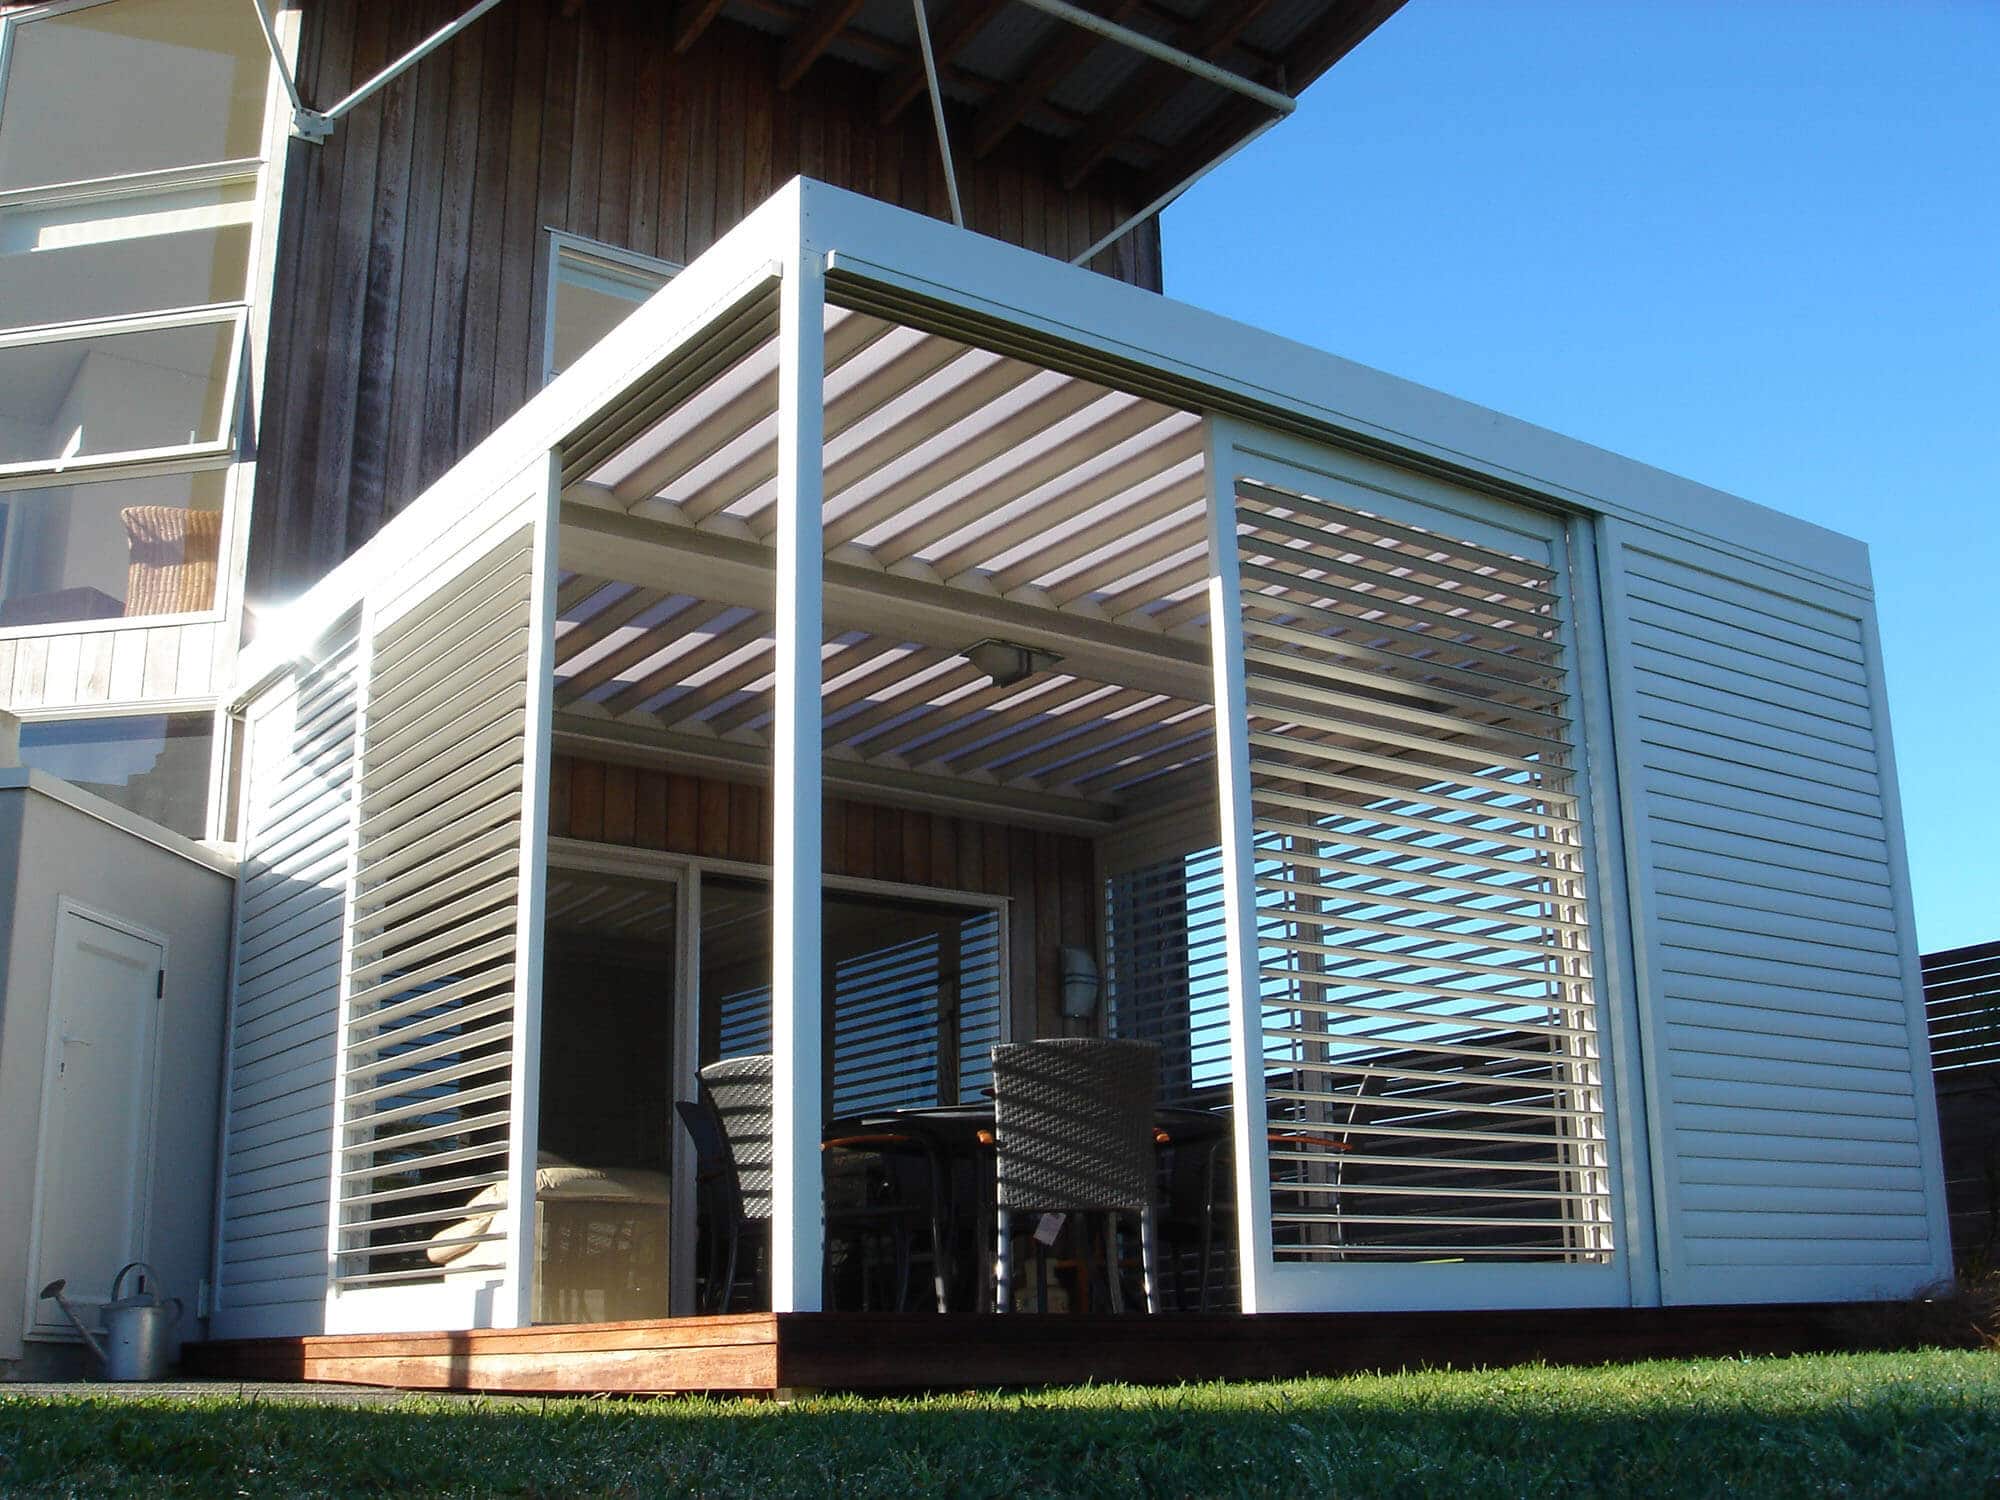 External outdoor aluminum plantation shutters fitted to patio